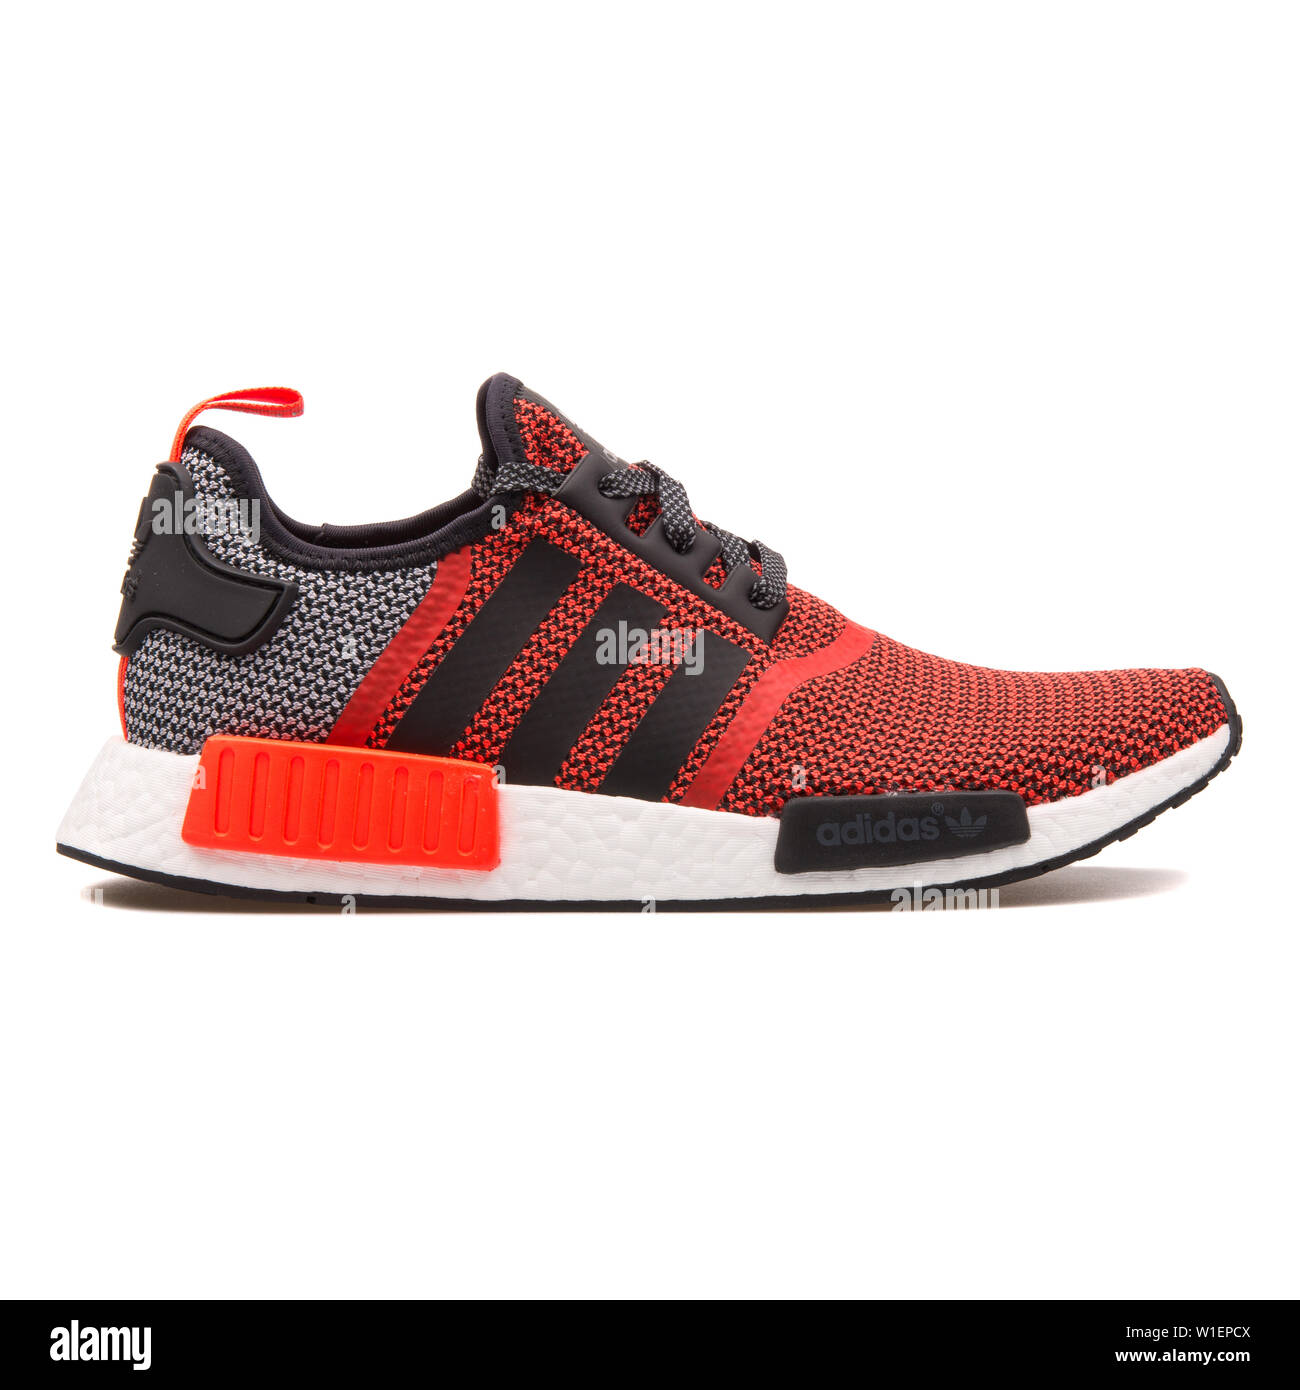 VIENNA, AUSTRIA - AUGUST 10, 2017: Adidas NMD R1 red and black sneaker on  white background Stock Photo - Alamy